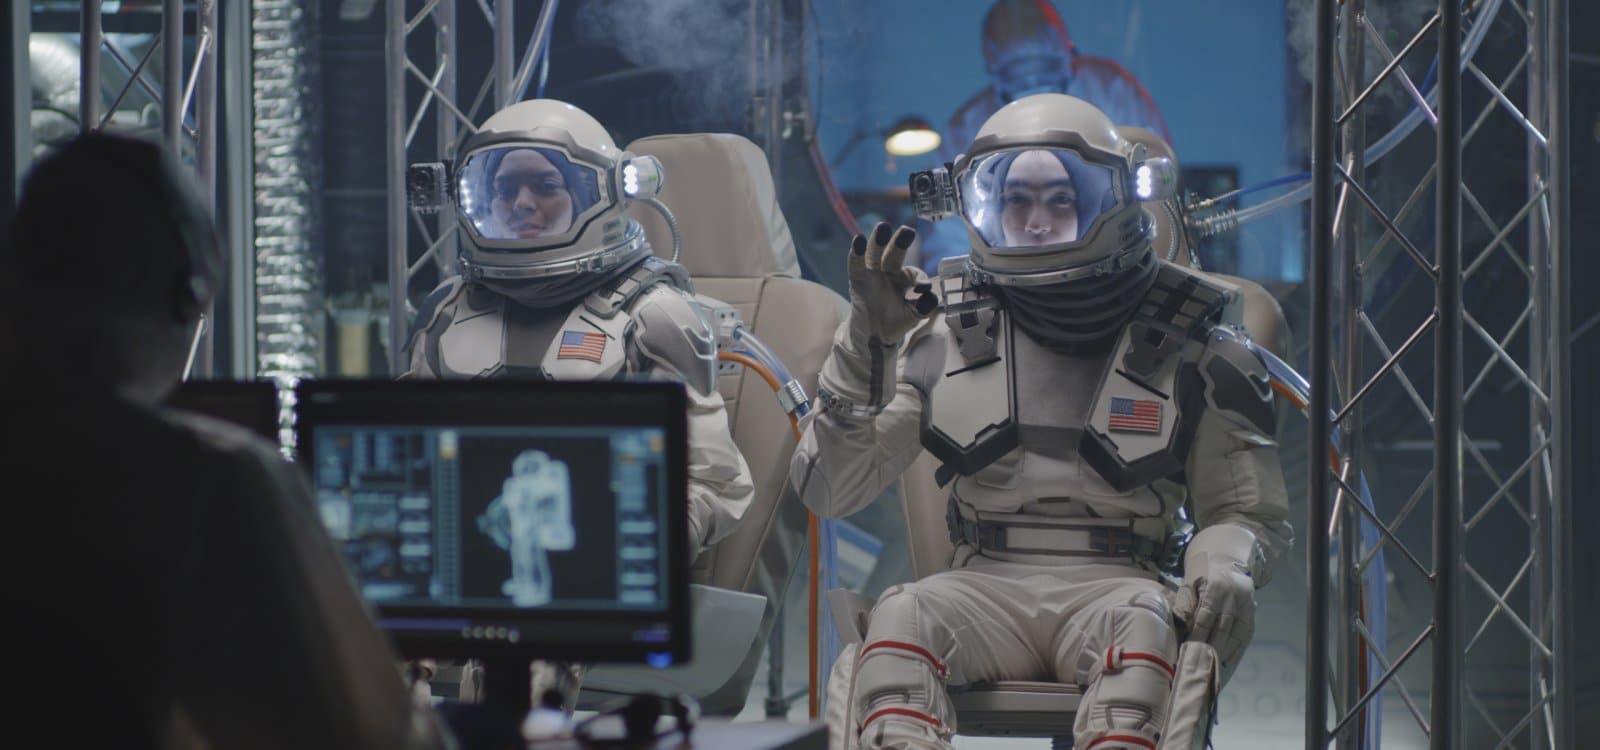 <p class="wp-caption-text">Image Credit: Shutterstock / Frame Stock Footage</p>  <p><span>Astronaut training experiences are comprehensive programs designed to simulate the physical and mental preparation required for space travel. These programs cover a wide range of activities, from high-G force centrifuge training to simulate rocket launches to underwater neutral buoyancy sessions that mimic the weightlessness of space.</span></p> <p><span>Participants also engage in classroom sessions where they learn about spacecraft operations, navigation, and the science behind human spaceflight. Additionally, survival training exercises prepare participants for emergency scenarios, including how to safely return to Earth in unforeseen circumstances.</span></p> <p><span>These experiences are offered by various space agencies and private companies, aiming to provide an authentic glimpse into the life of an astronaut and the rigorous training they undergo.</span></p> <p><b>Insider’s Tip:</b><span> Embrace every aspect of the training for a holistic understanding of the physical and psychological demands of space travel.</span></p>